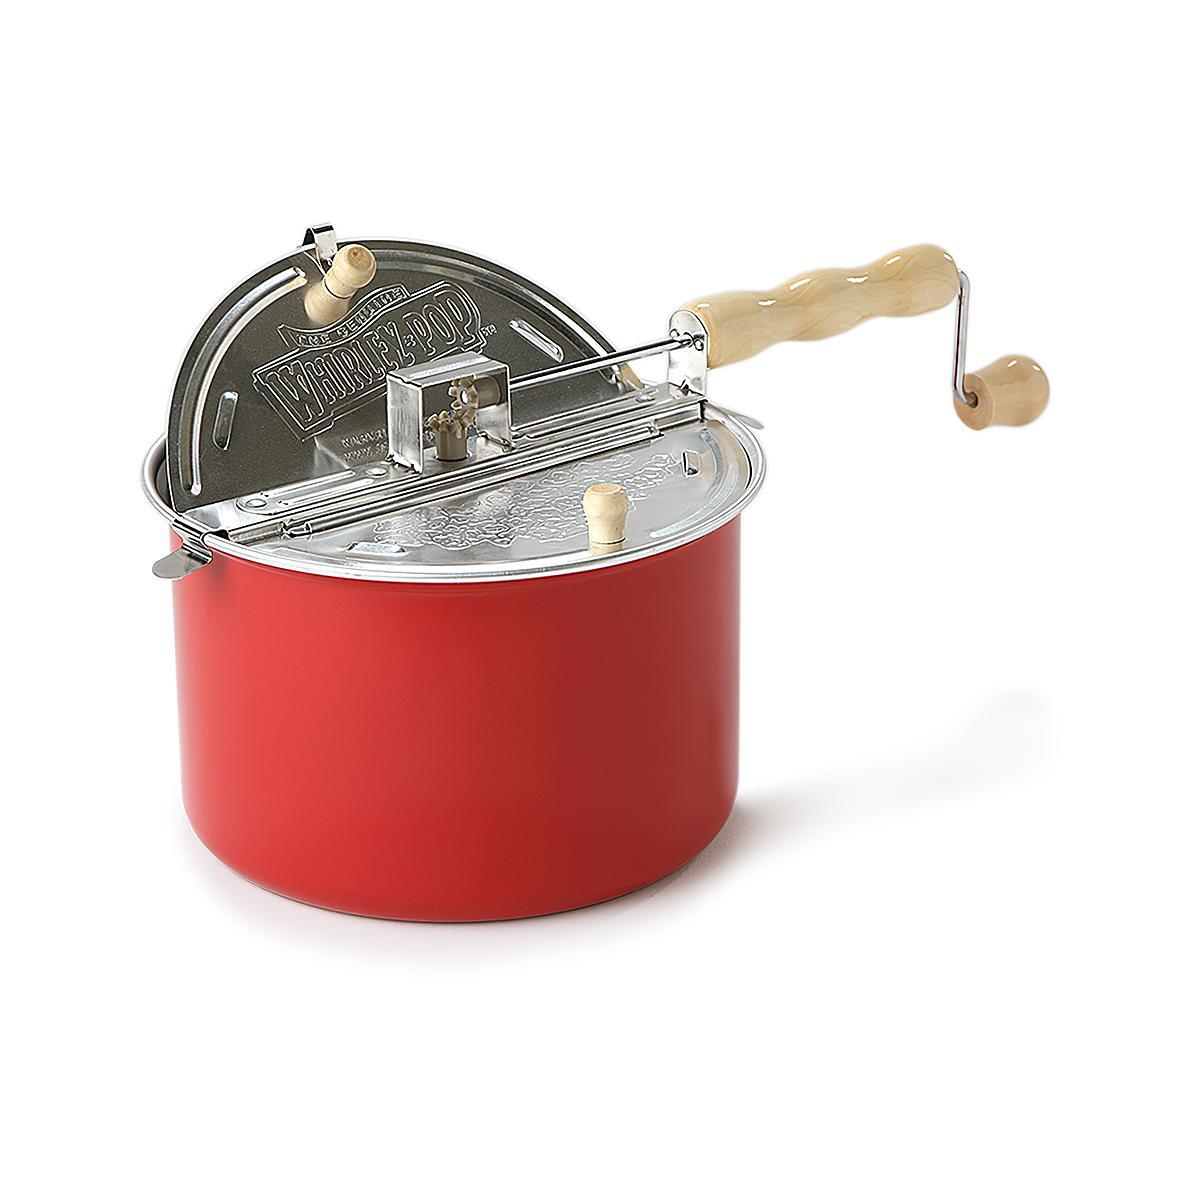 Whirley Pop Old Fashioned Popcorn Popper Stovetop Aluminum